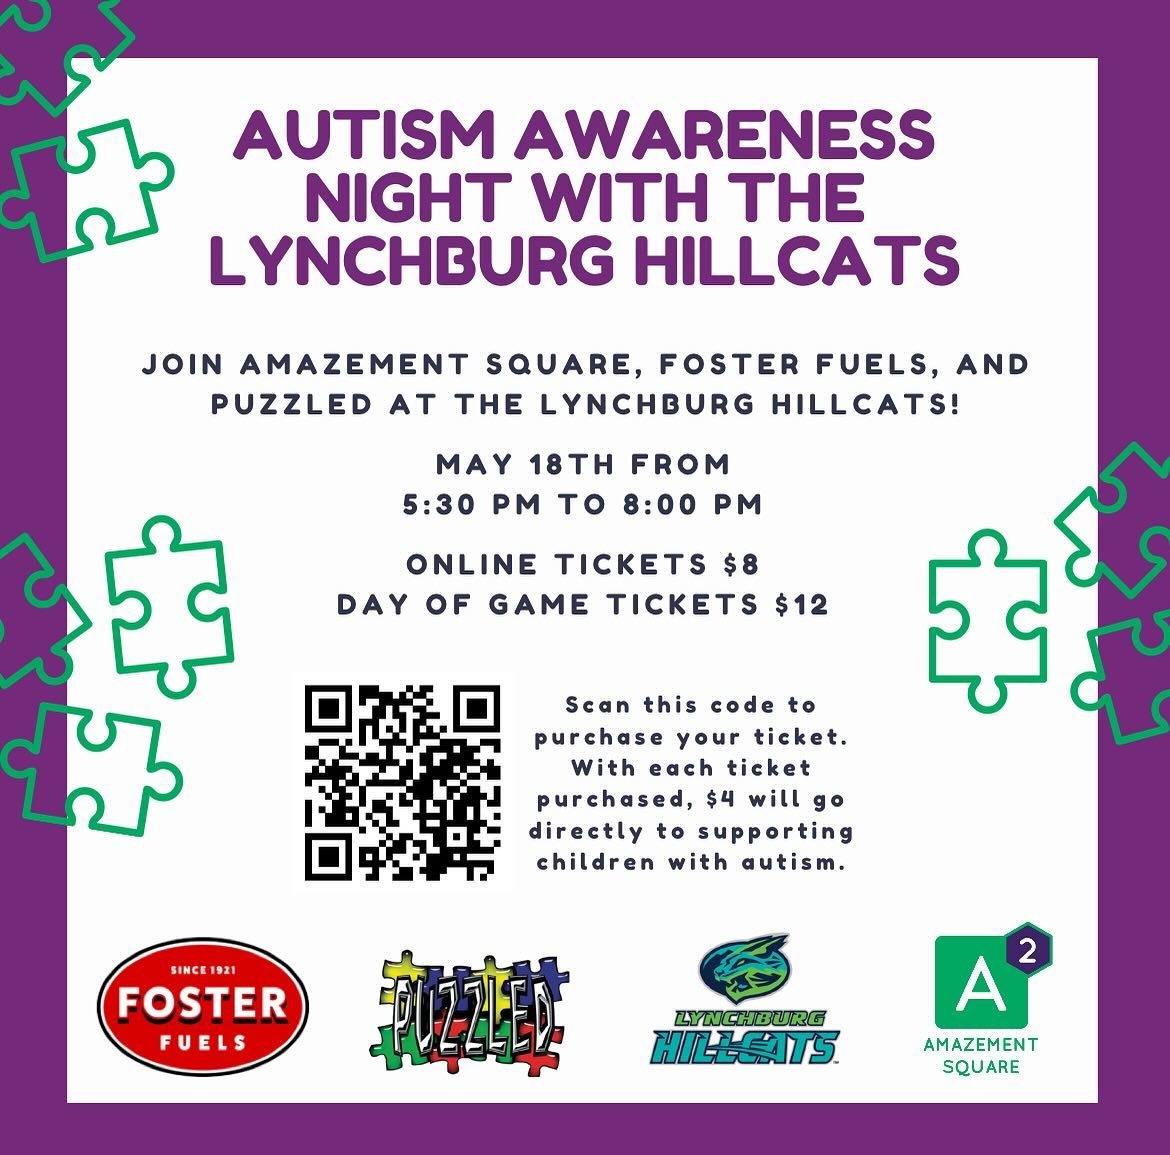 Join Amazement Square, Puzzled, and Foster Fuels this Saturday May 18th from 5:30pm - 8:00pm at the Lynchburg Hillcats Autism Awareness Night! 
Scan the QR code or go to the link in our bio to purchase tickets.

We are looking forward to a night full